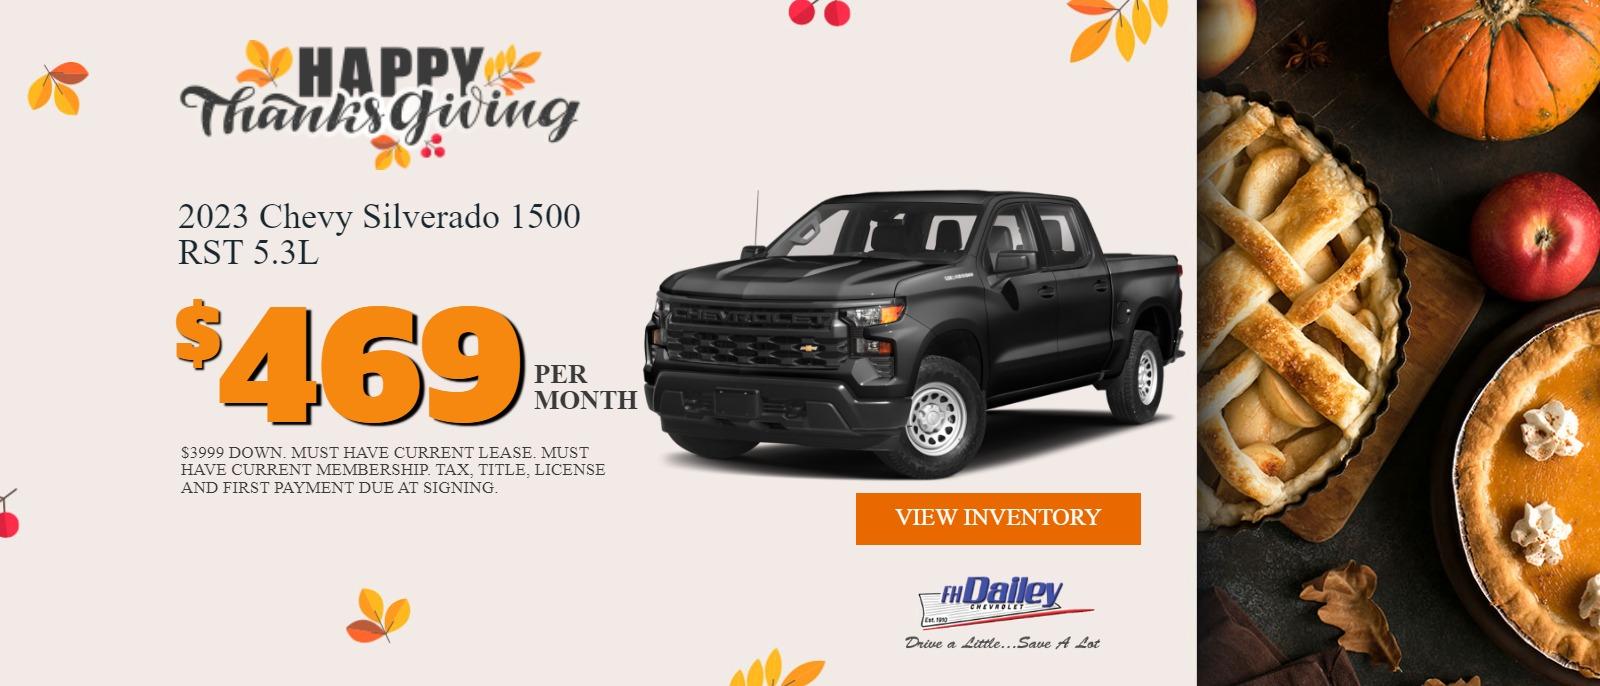 2023 CHEVY SILVERADO RST 5.3L
$3,999 DOWN
$469 PER MONTH
*MUST HAVE CURRENT LEASE
*MUST HAVE CURRENT MEMBERSHIP
*TAX, TITLE, LICENSE, AND FIRST PAYMENT DUE AT SIGNING